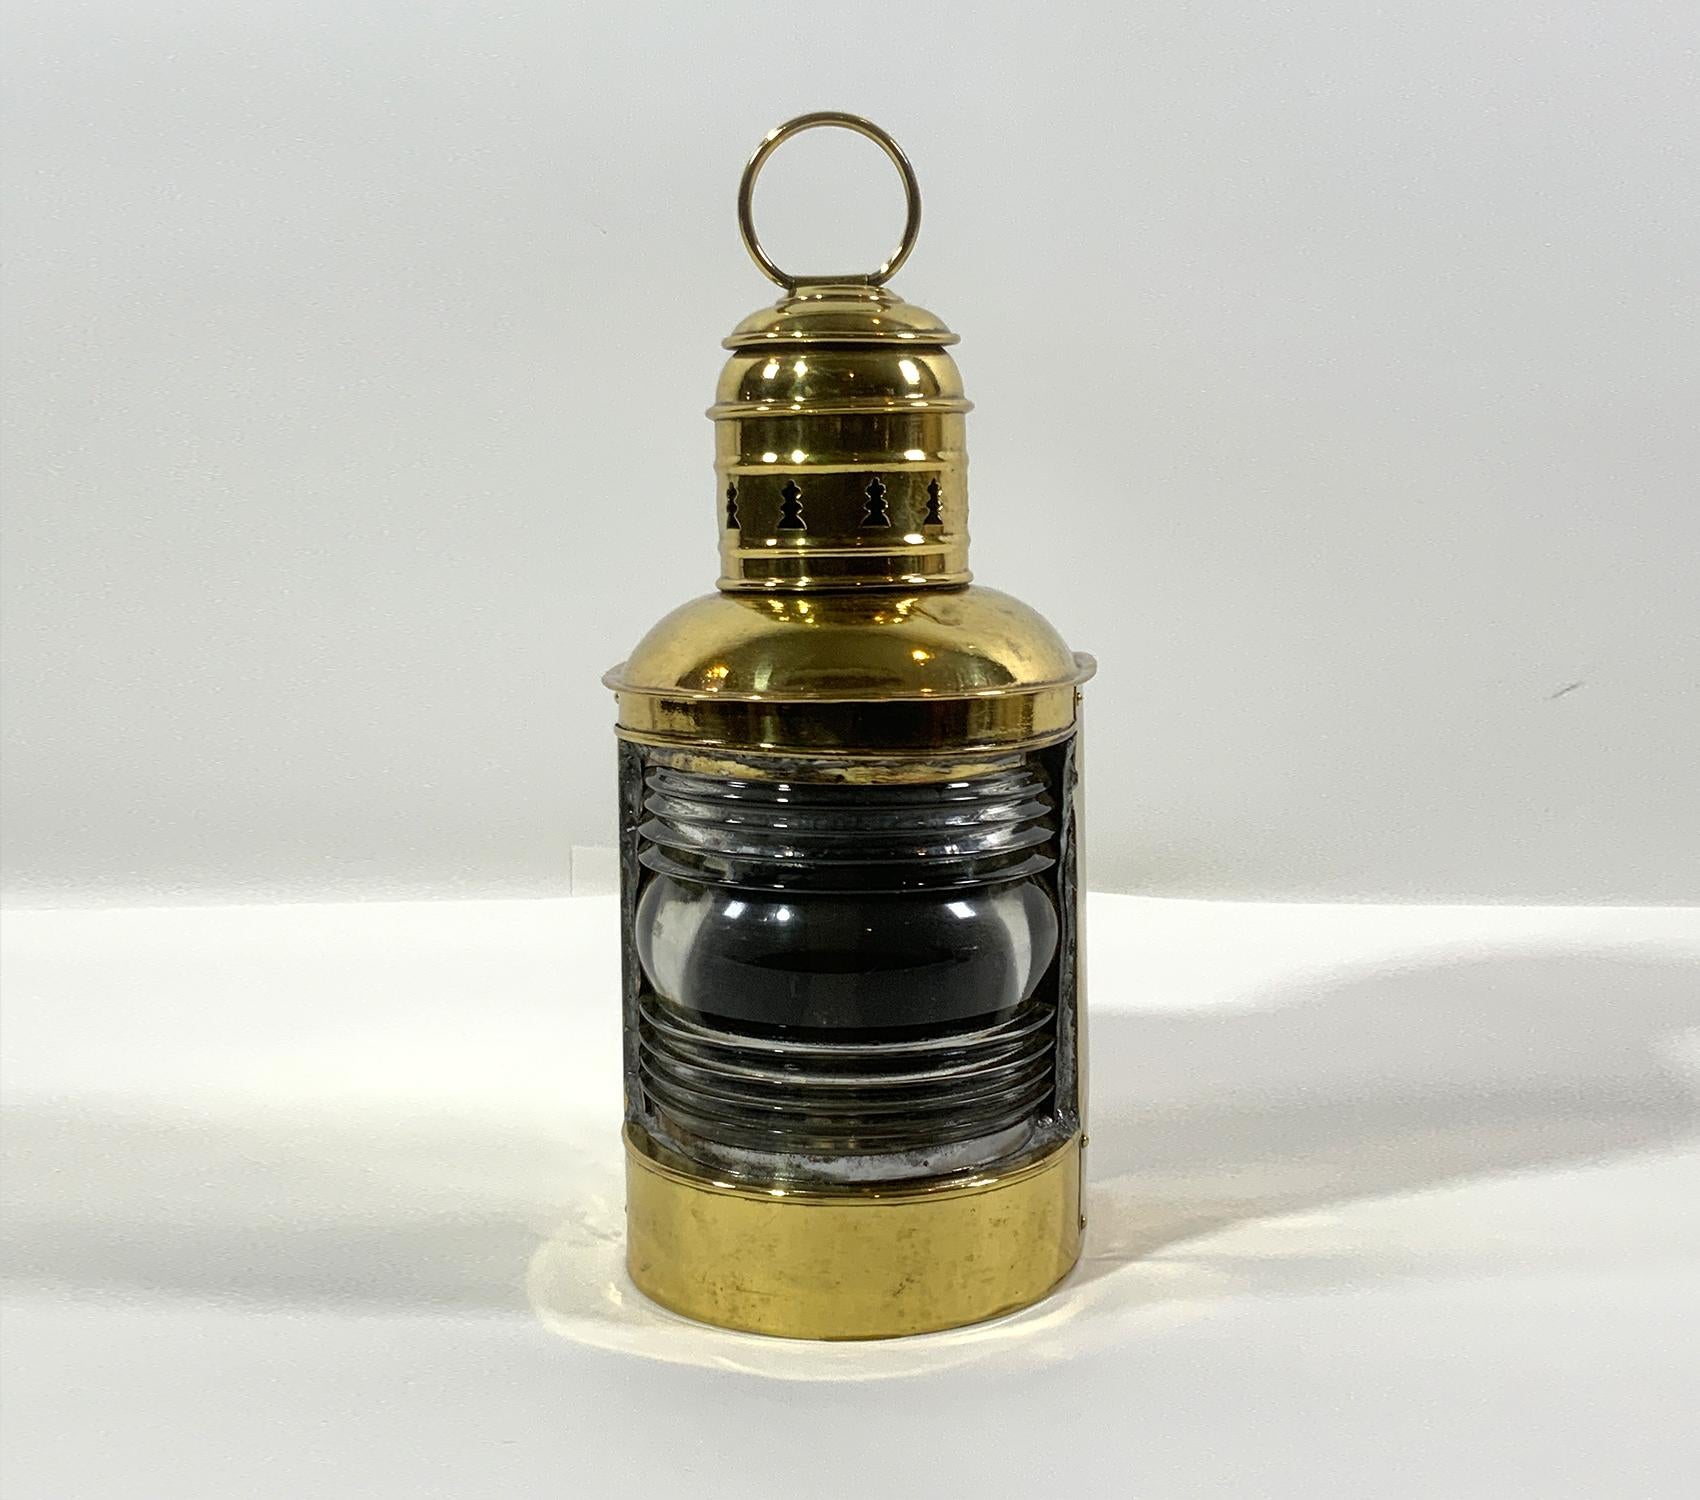 Solid brass ships masthead lantern. Polished brass with Fresnel lens. Vented top and carry ring.

Weight: 4 lbs
Overall Dimensions: 11